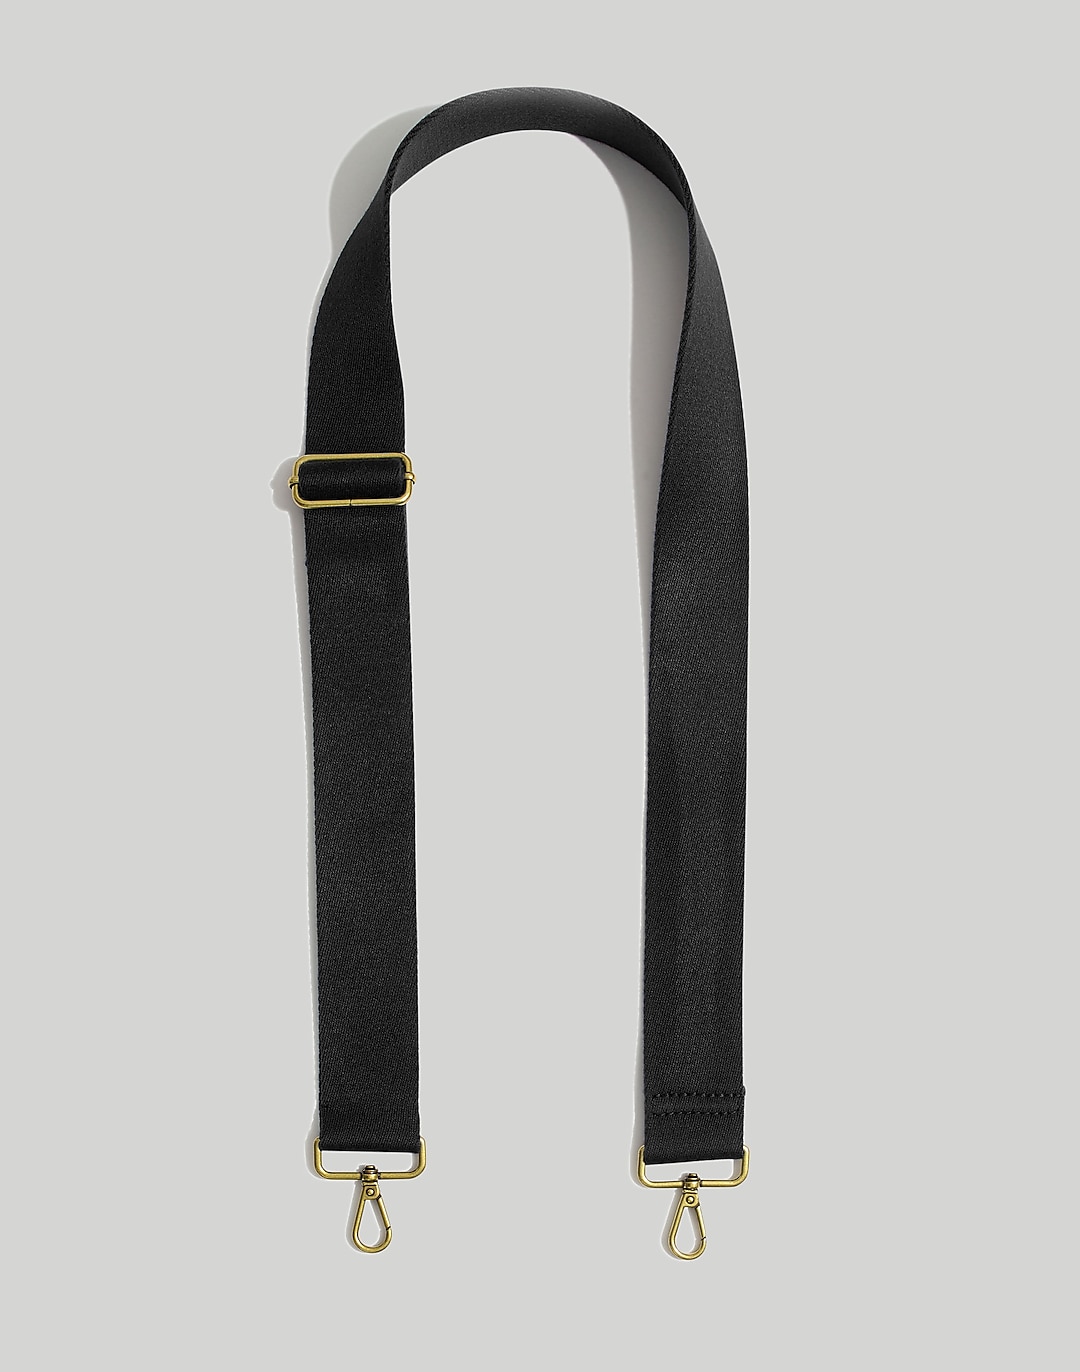 Madewell The Crossbody Bag Strap: Webbing Edition in True Black - Size One S